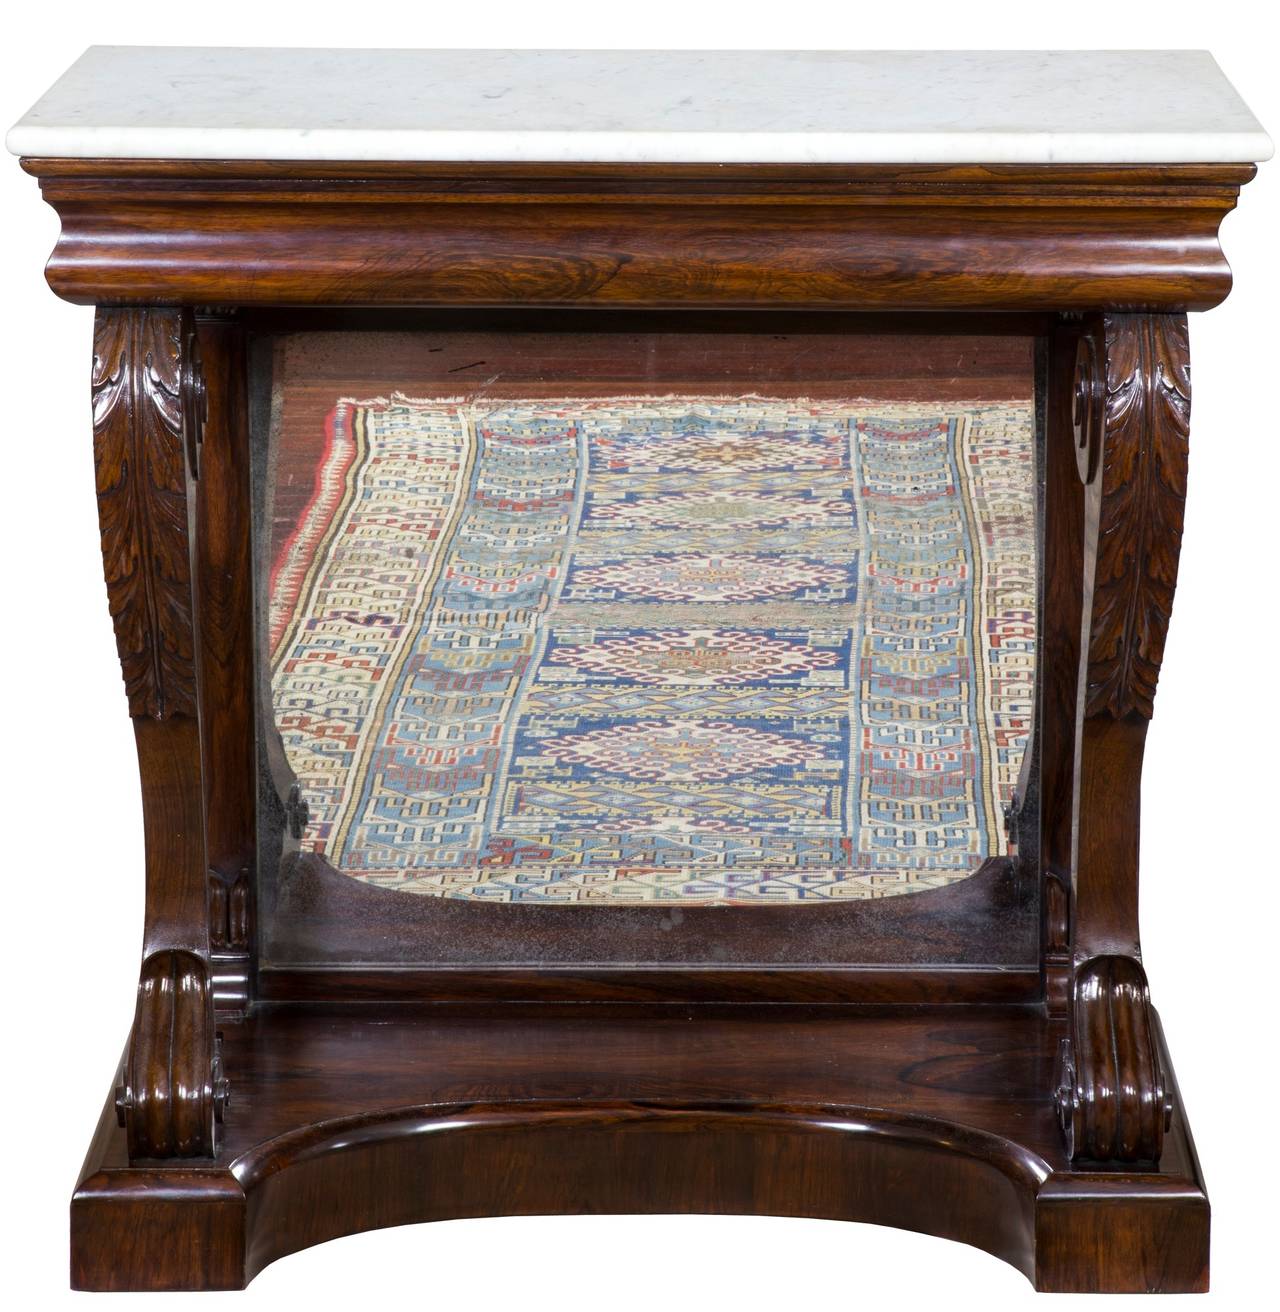 Pier tables in this period seldom appear in rosewood as this wood was just becoming fashionable. The rosewood is spectacular with color variation throughout. The carving of the acanthus, etc. is first class and the condition is superb, retaining its